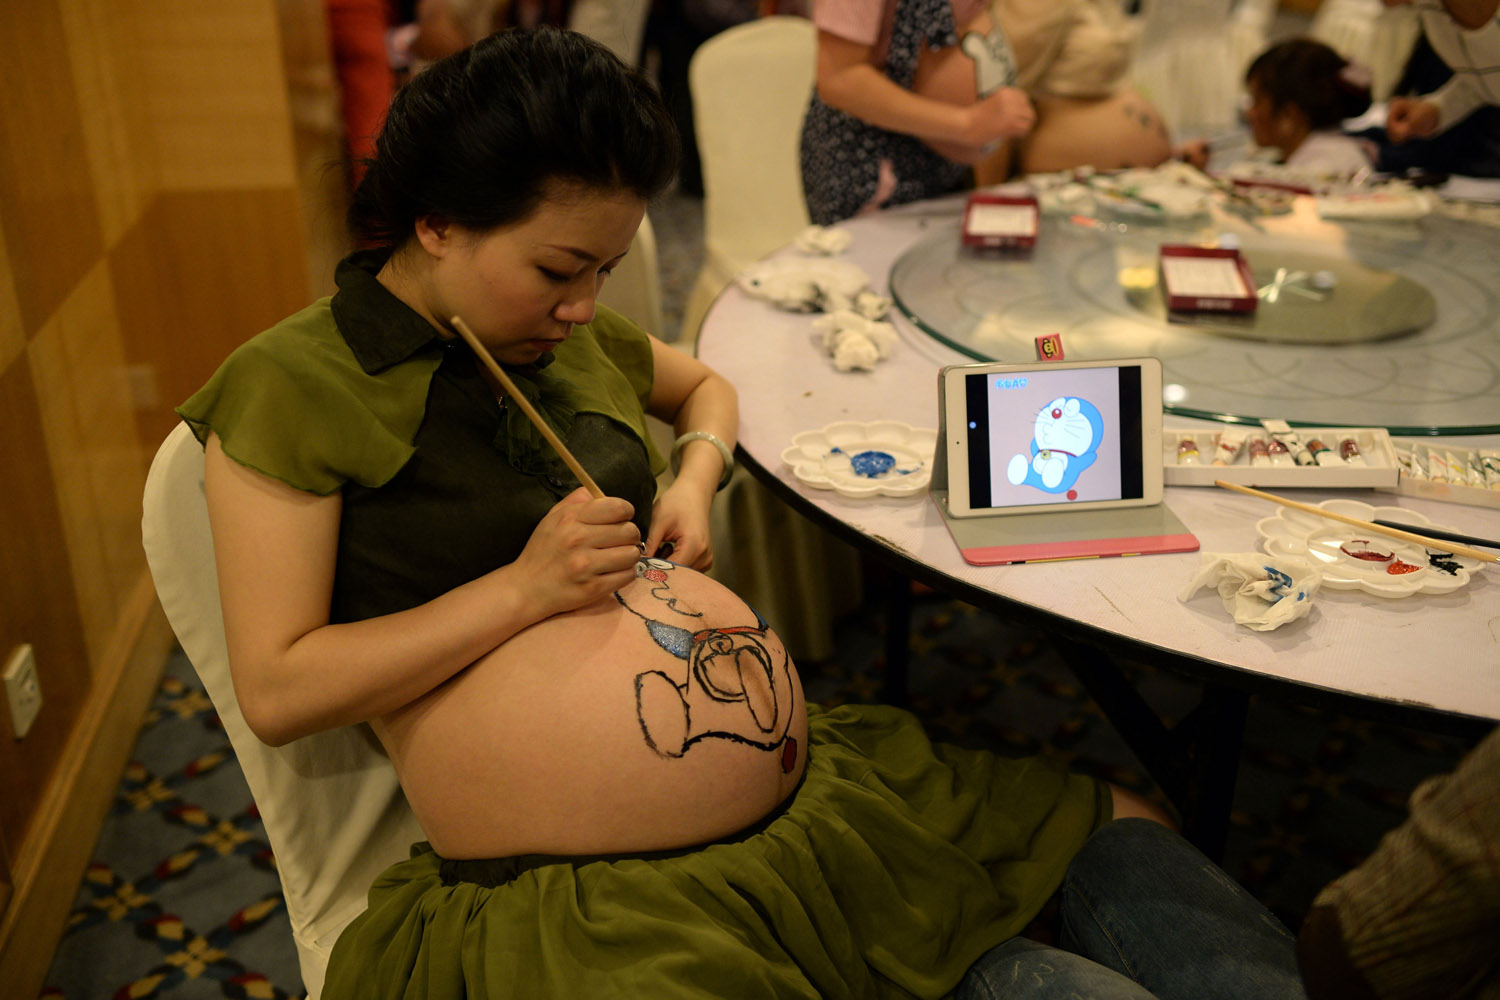 Oct. 27, 2013. A pregnant woman paints her belly during a contest organized by a maternity hospital in Chongqing, China.